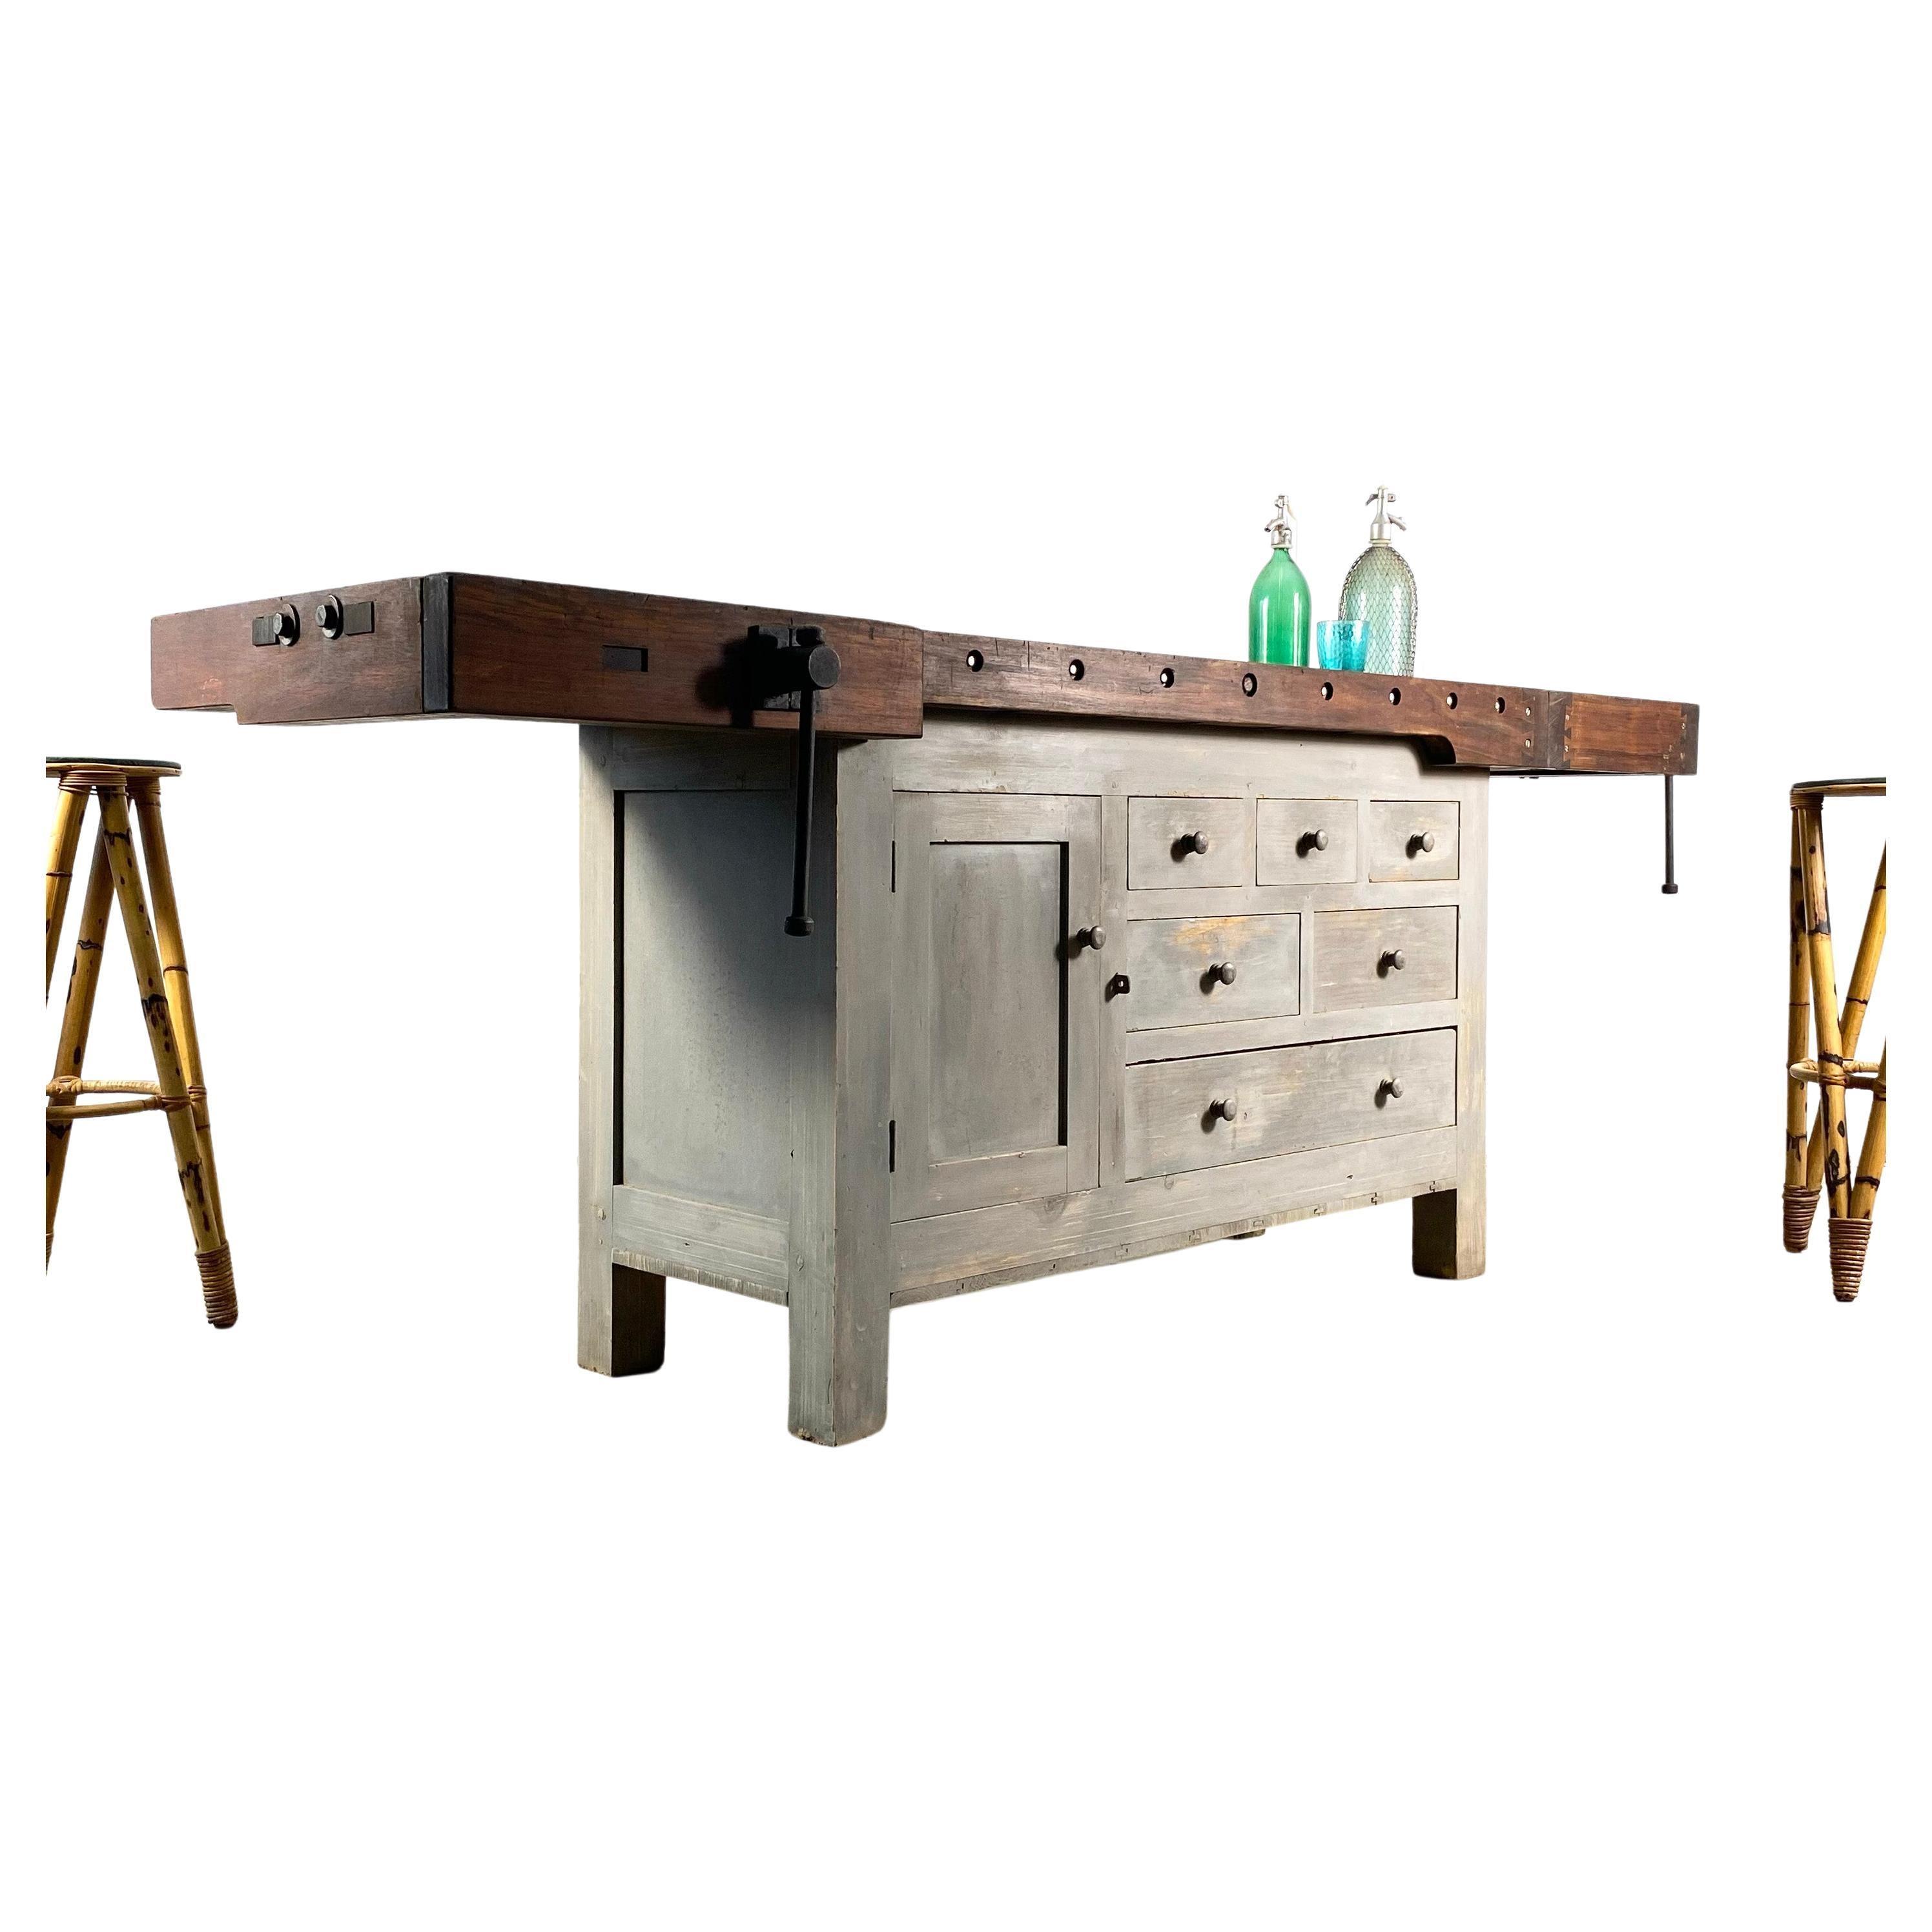 This is an unusual find for us. This 1930s workbench has a teak top with a grey / blue base. Sourced from Portugal, it has been beautifully made with over engineered dovetail components and lovely lines and details that really, are unnecessary for a